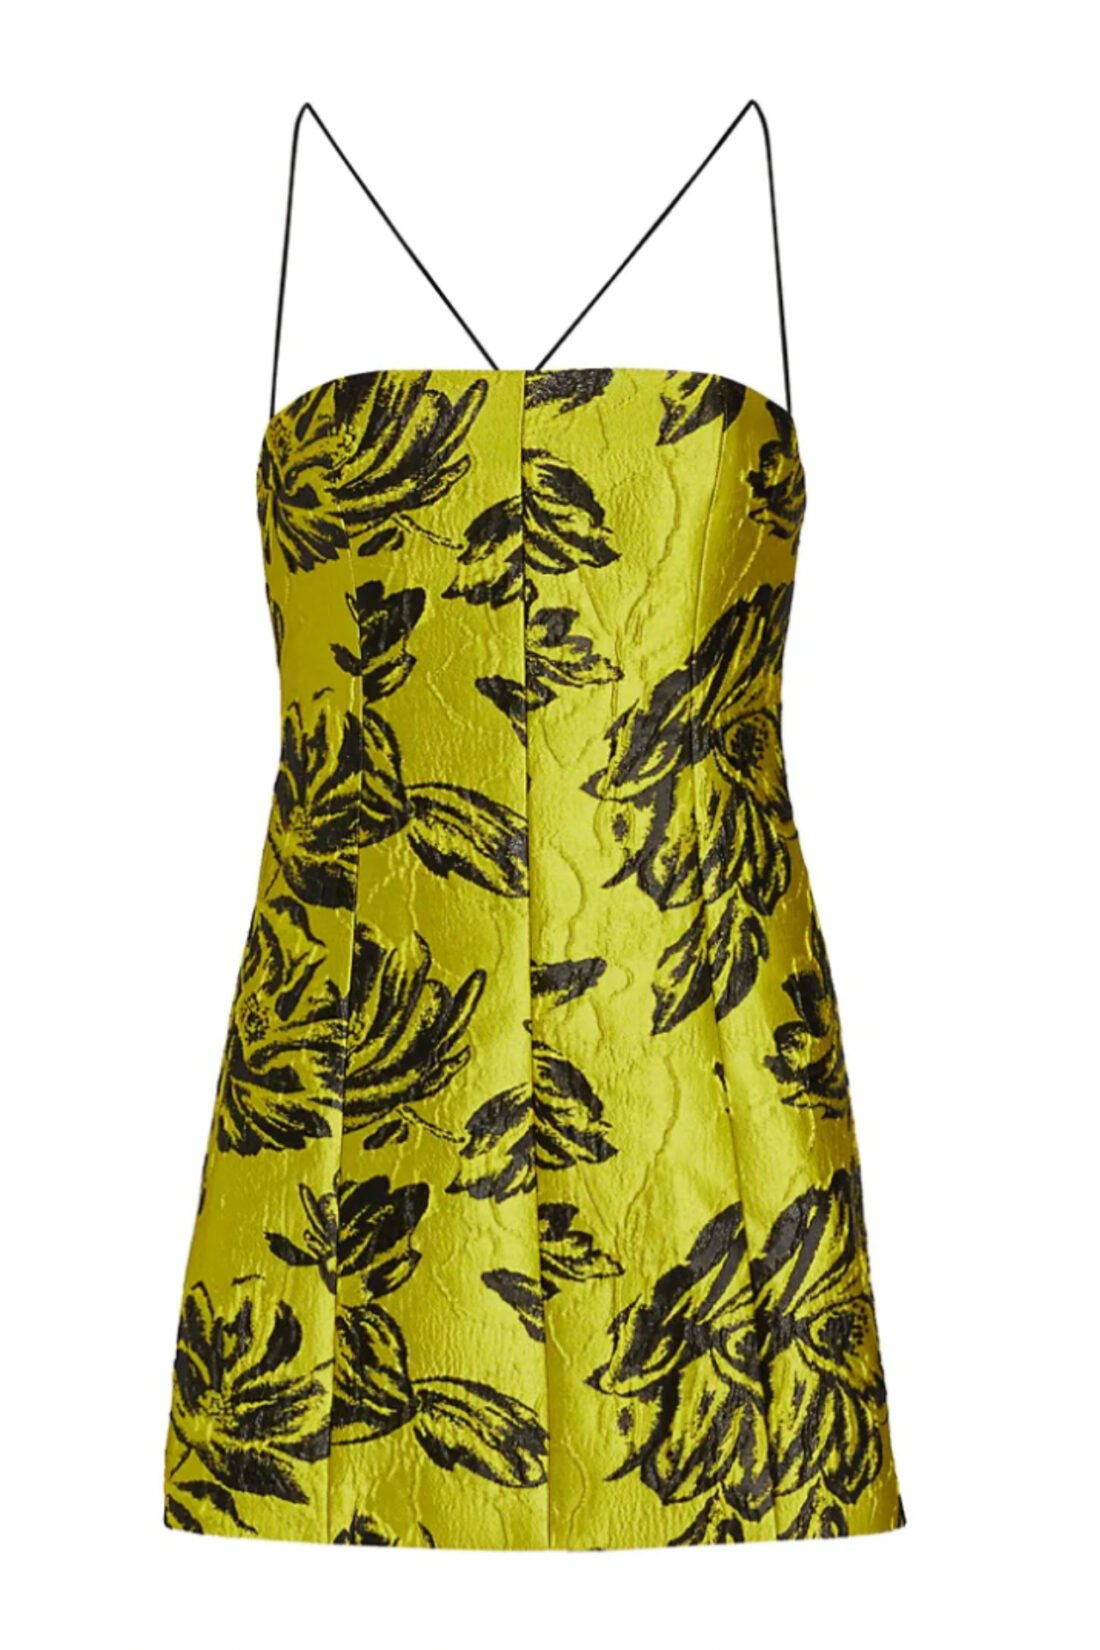 PERFECTLY PRINTED DRESSES - Atlantic-Pacific